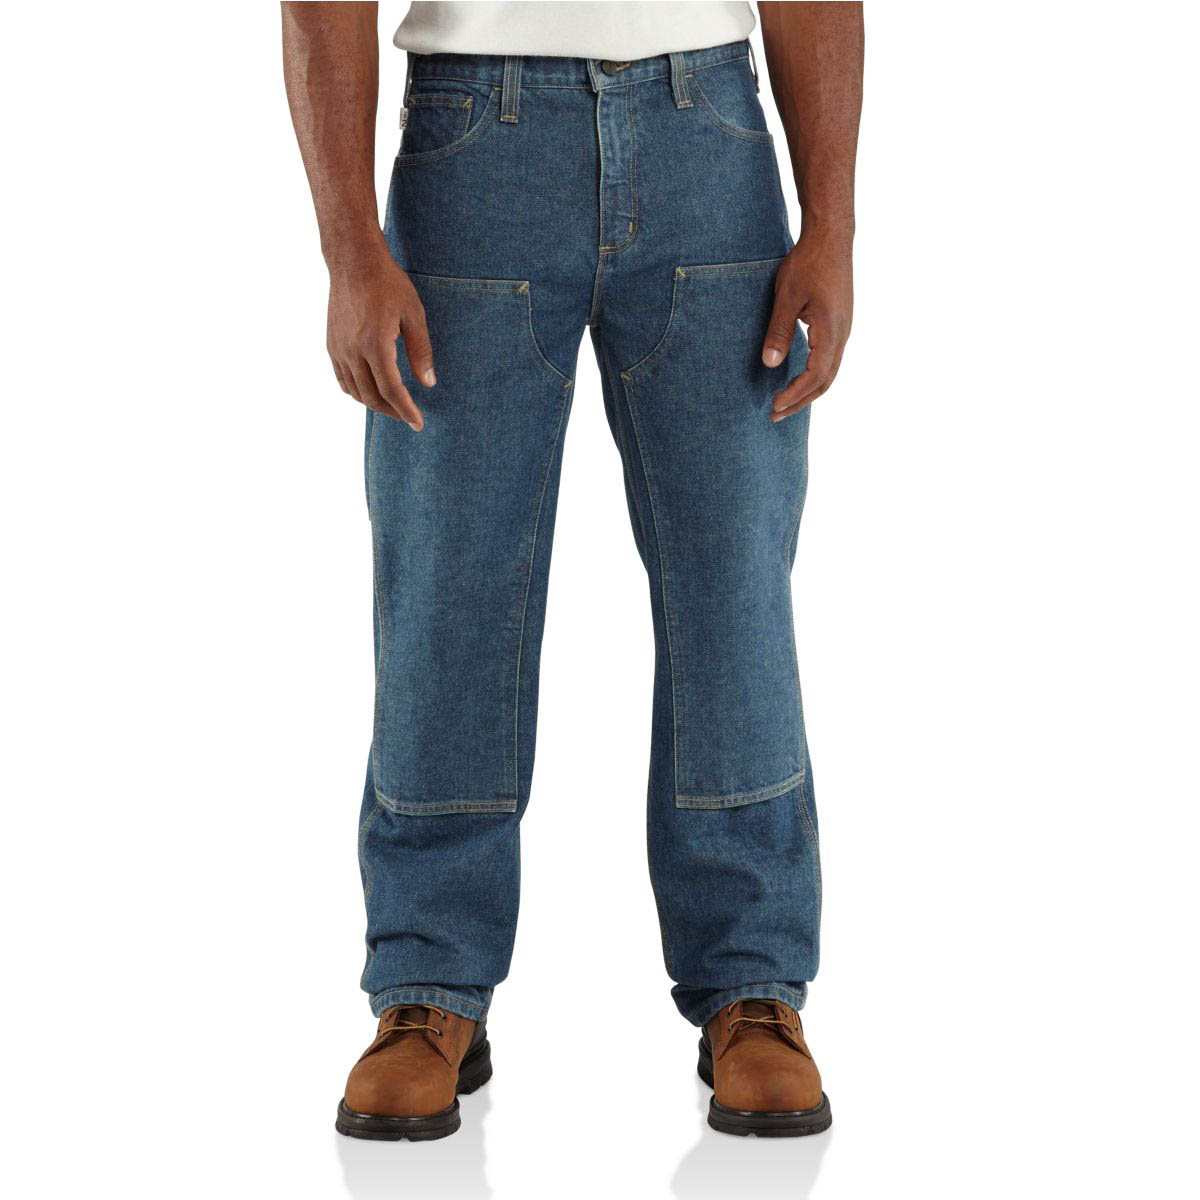 Carhartt Mens Flame Resistant Utility Denim Double Front Jean Relaxed Fit